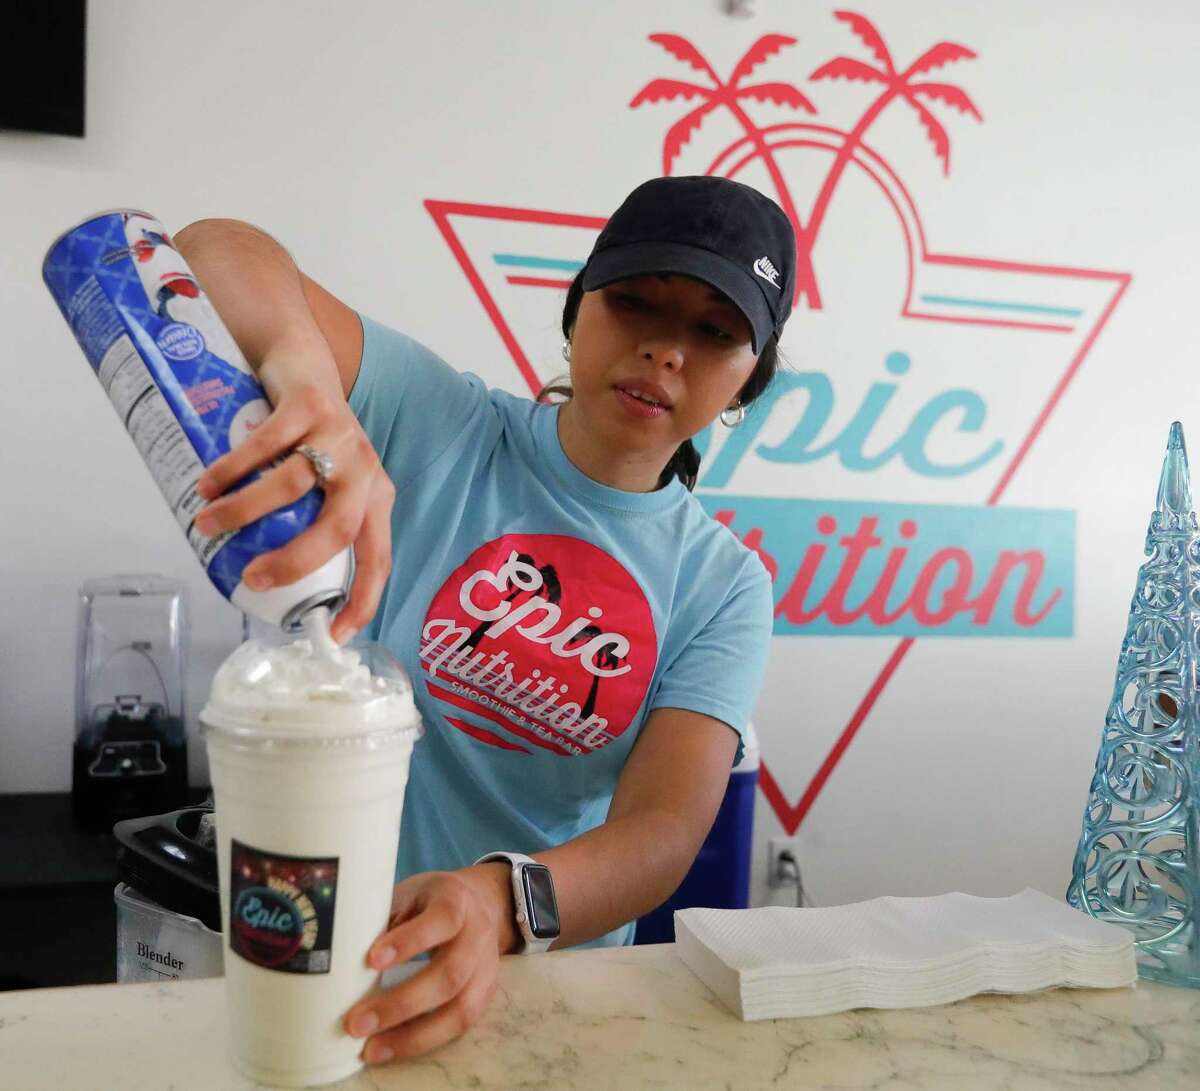 Diana Hernandez works on a shake at Epic Nutrition, Tuesday, Jan. 4, 2022, in Conroe. Hernandez and her husband, Jose Ramirez, opened their storefront along North Loop 336 a year ago serving detox and beauty teas, as well as pre-workout and protein coffees.